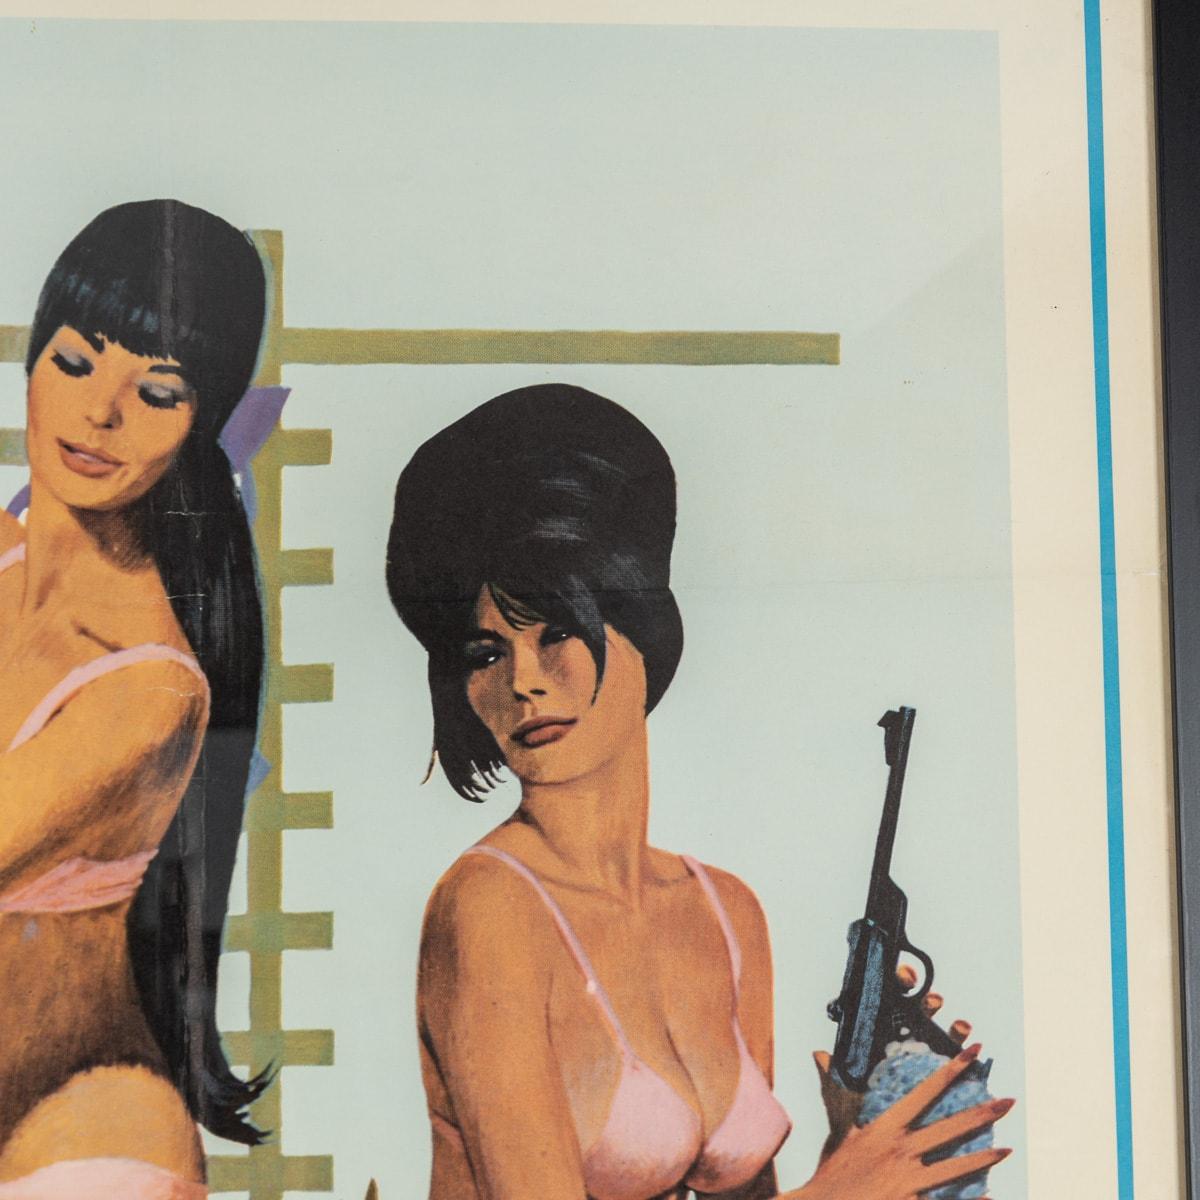 Original U.S Release James Bond 007 'You Only Live Twice' Subway C Poster c.1967 For Sale 10